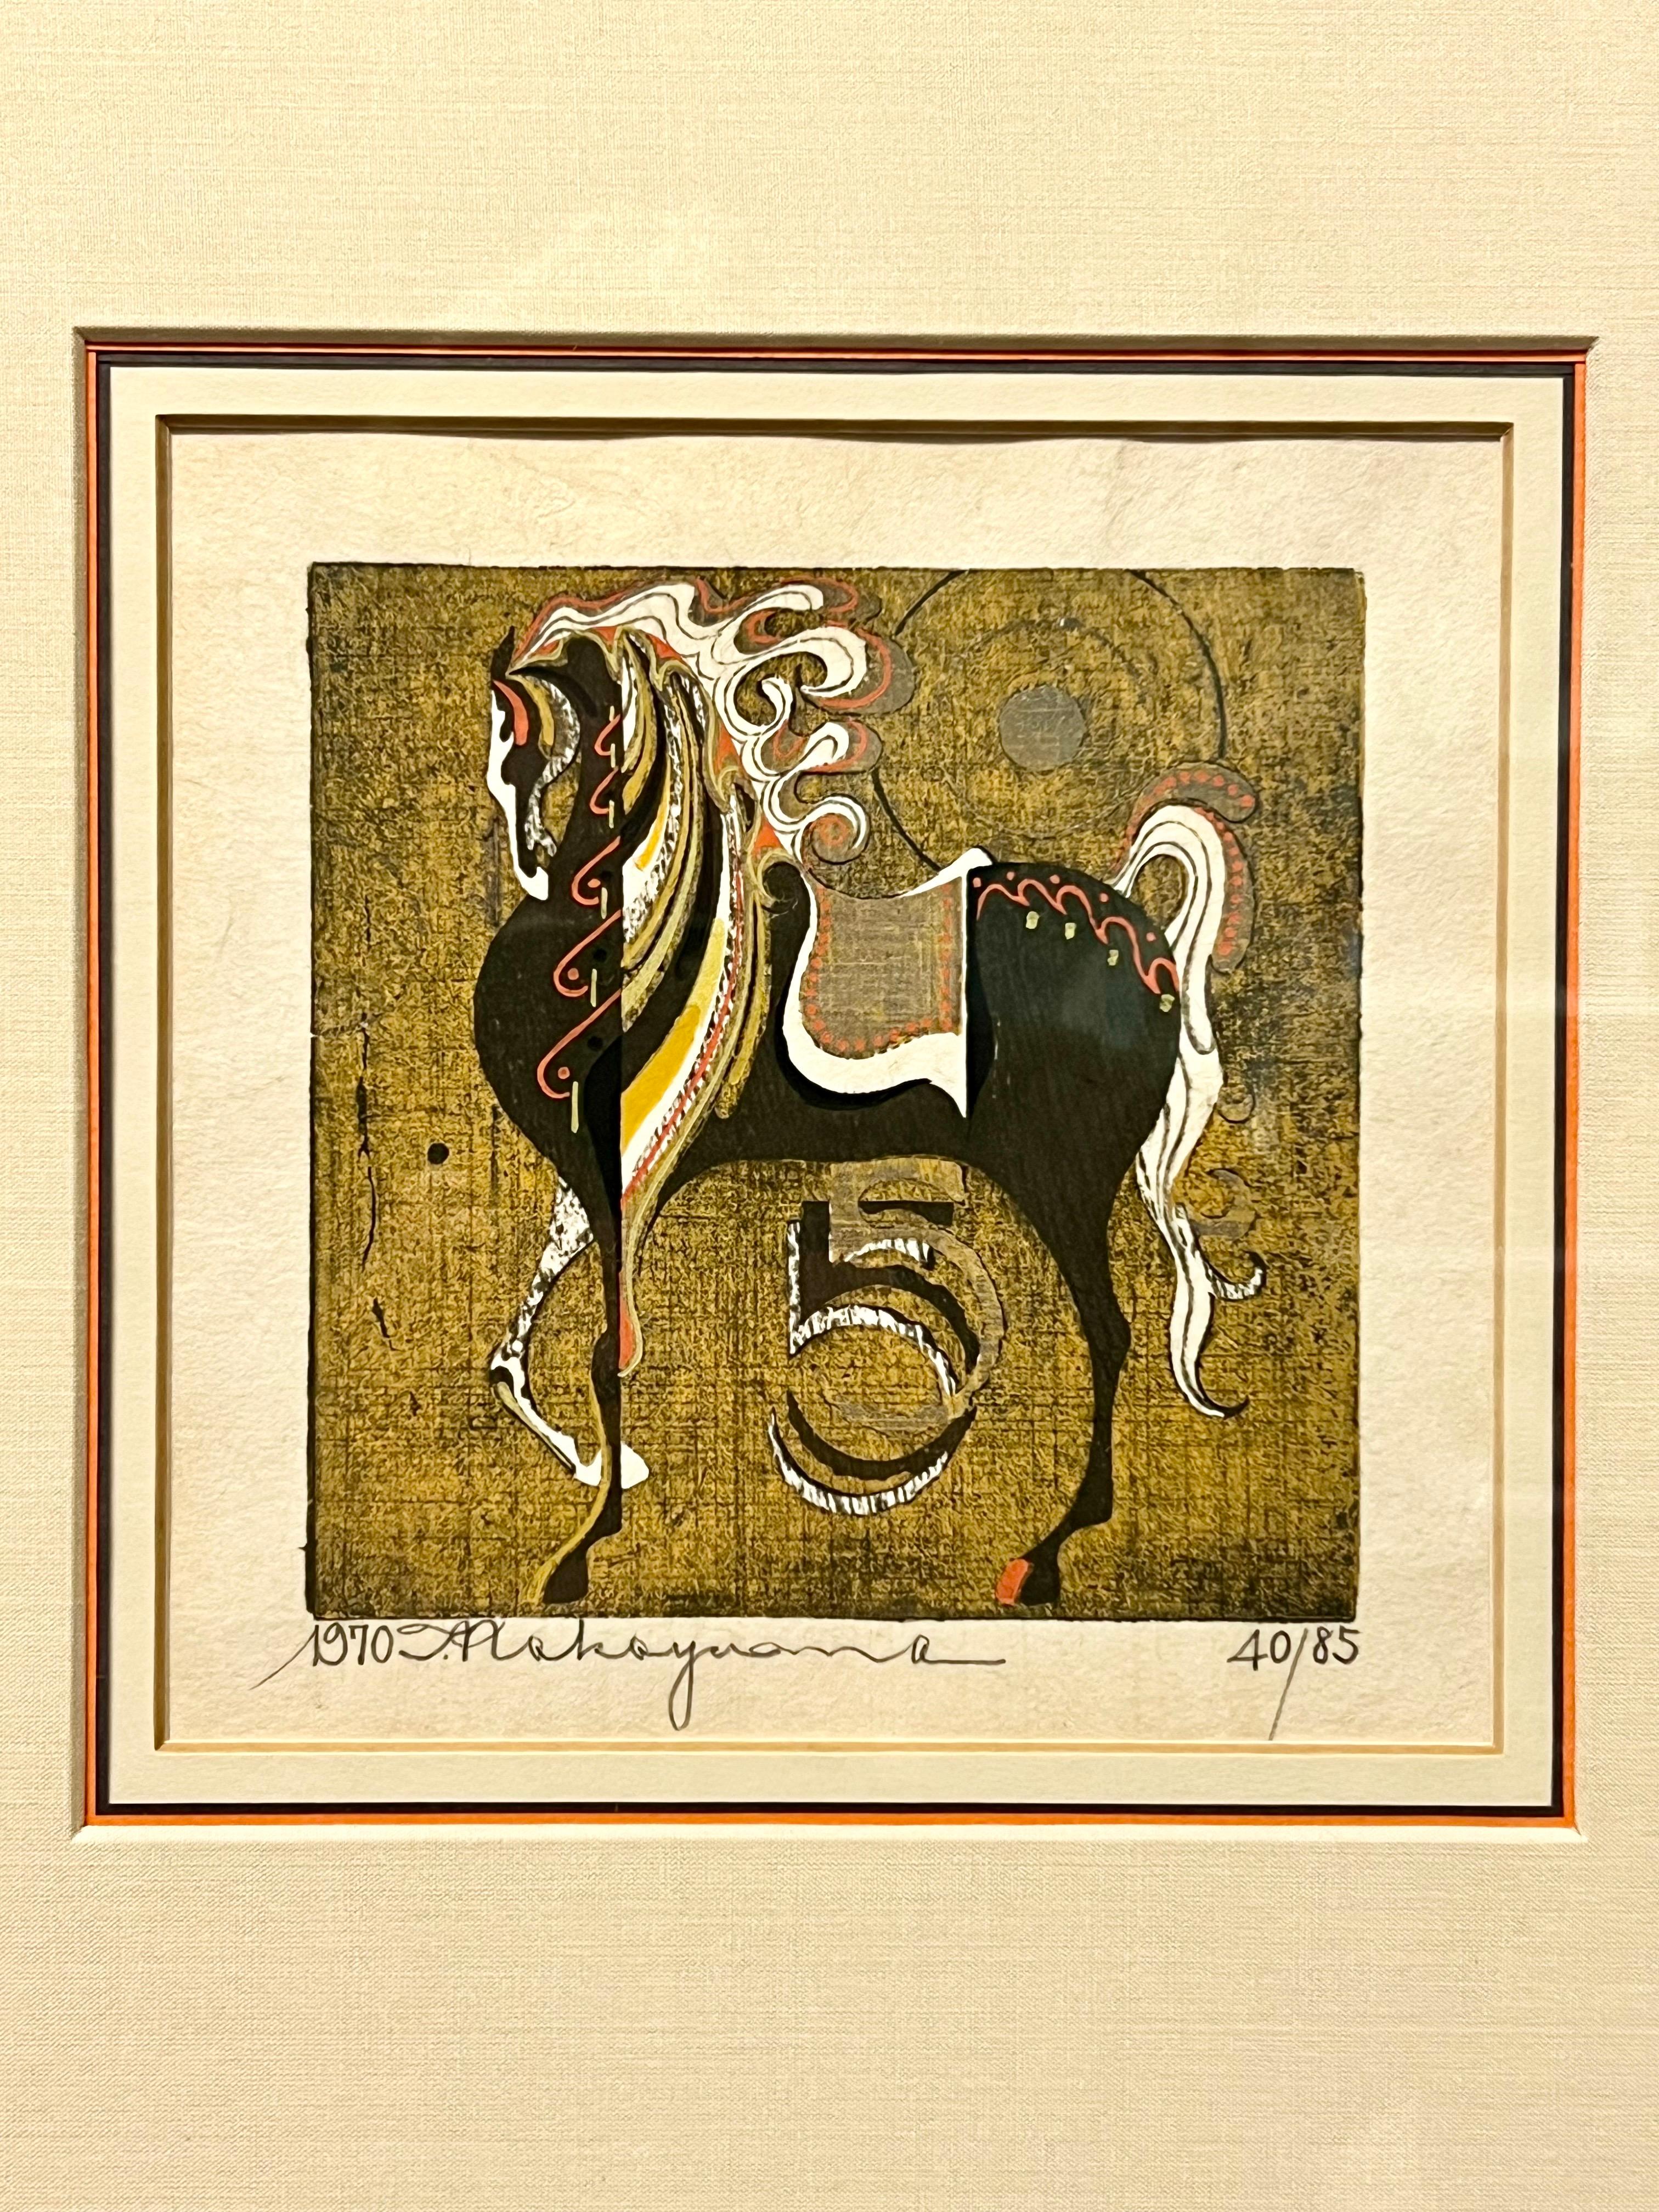 Fantastic woodblock by well listed Japanese artist, Tadashi Nakayama Titled “Horse in Gala Dress” c1970 in original period frame.

Tadashi Nakayama was born in Niigata. In 1945, he enrolled at Tama College of Art to study oil painting however, he